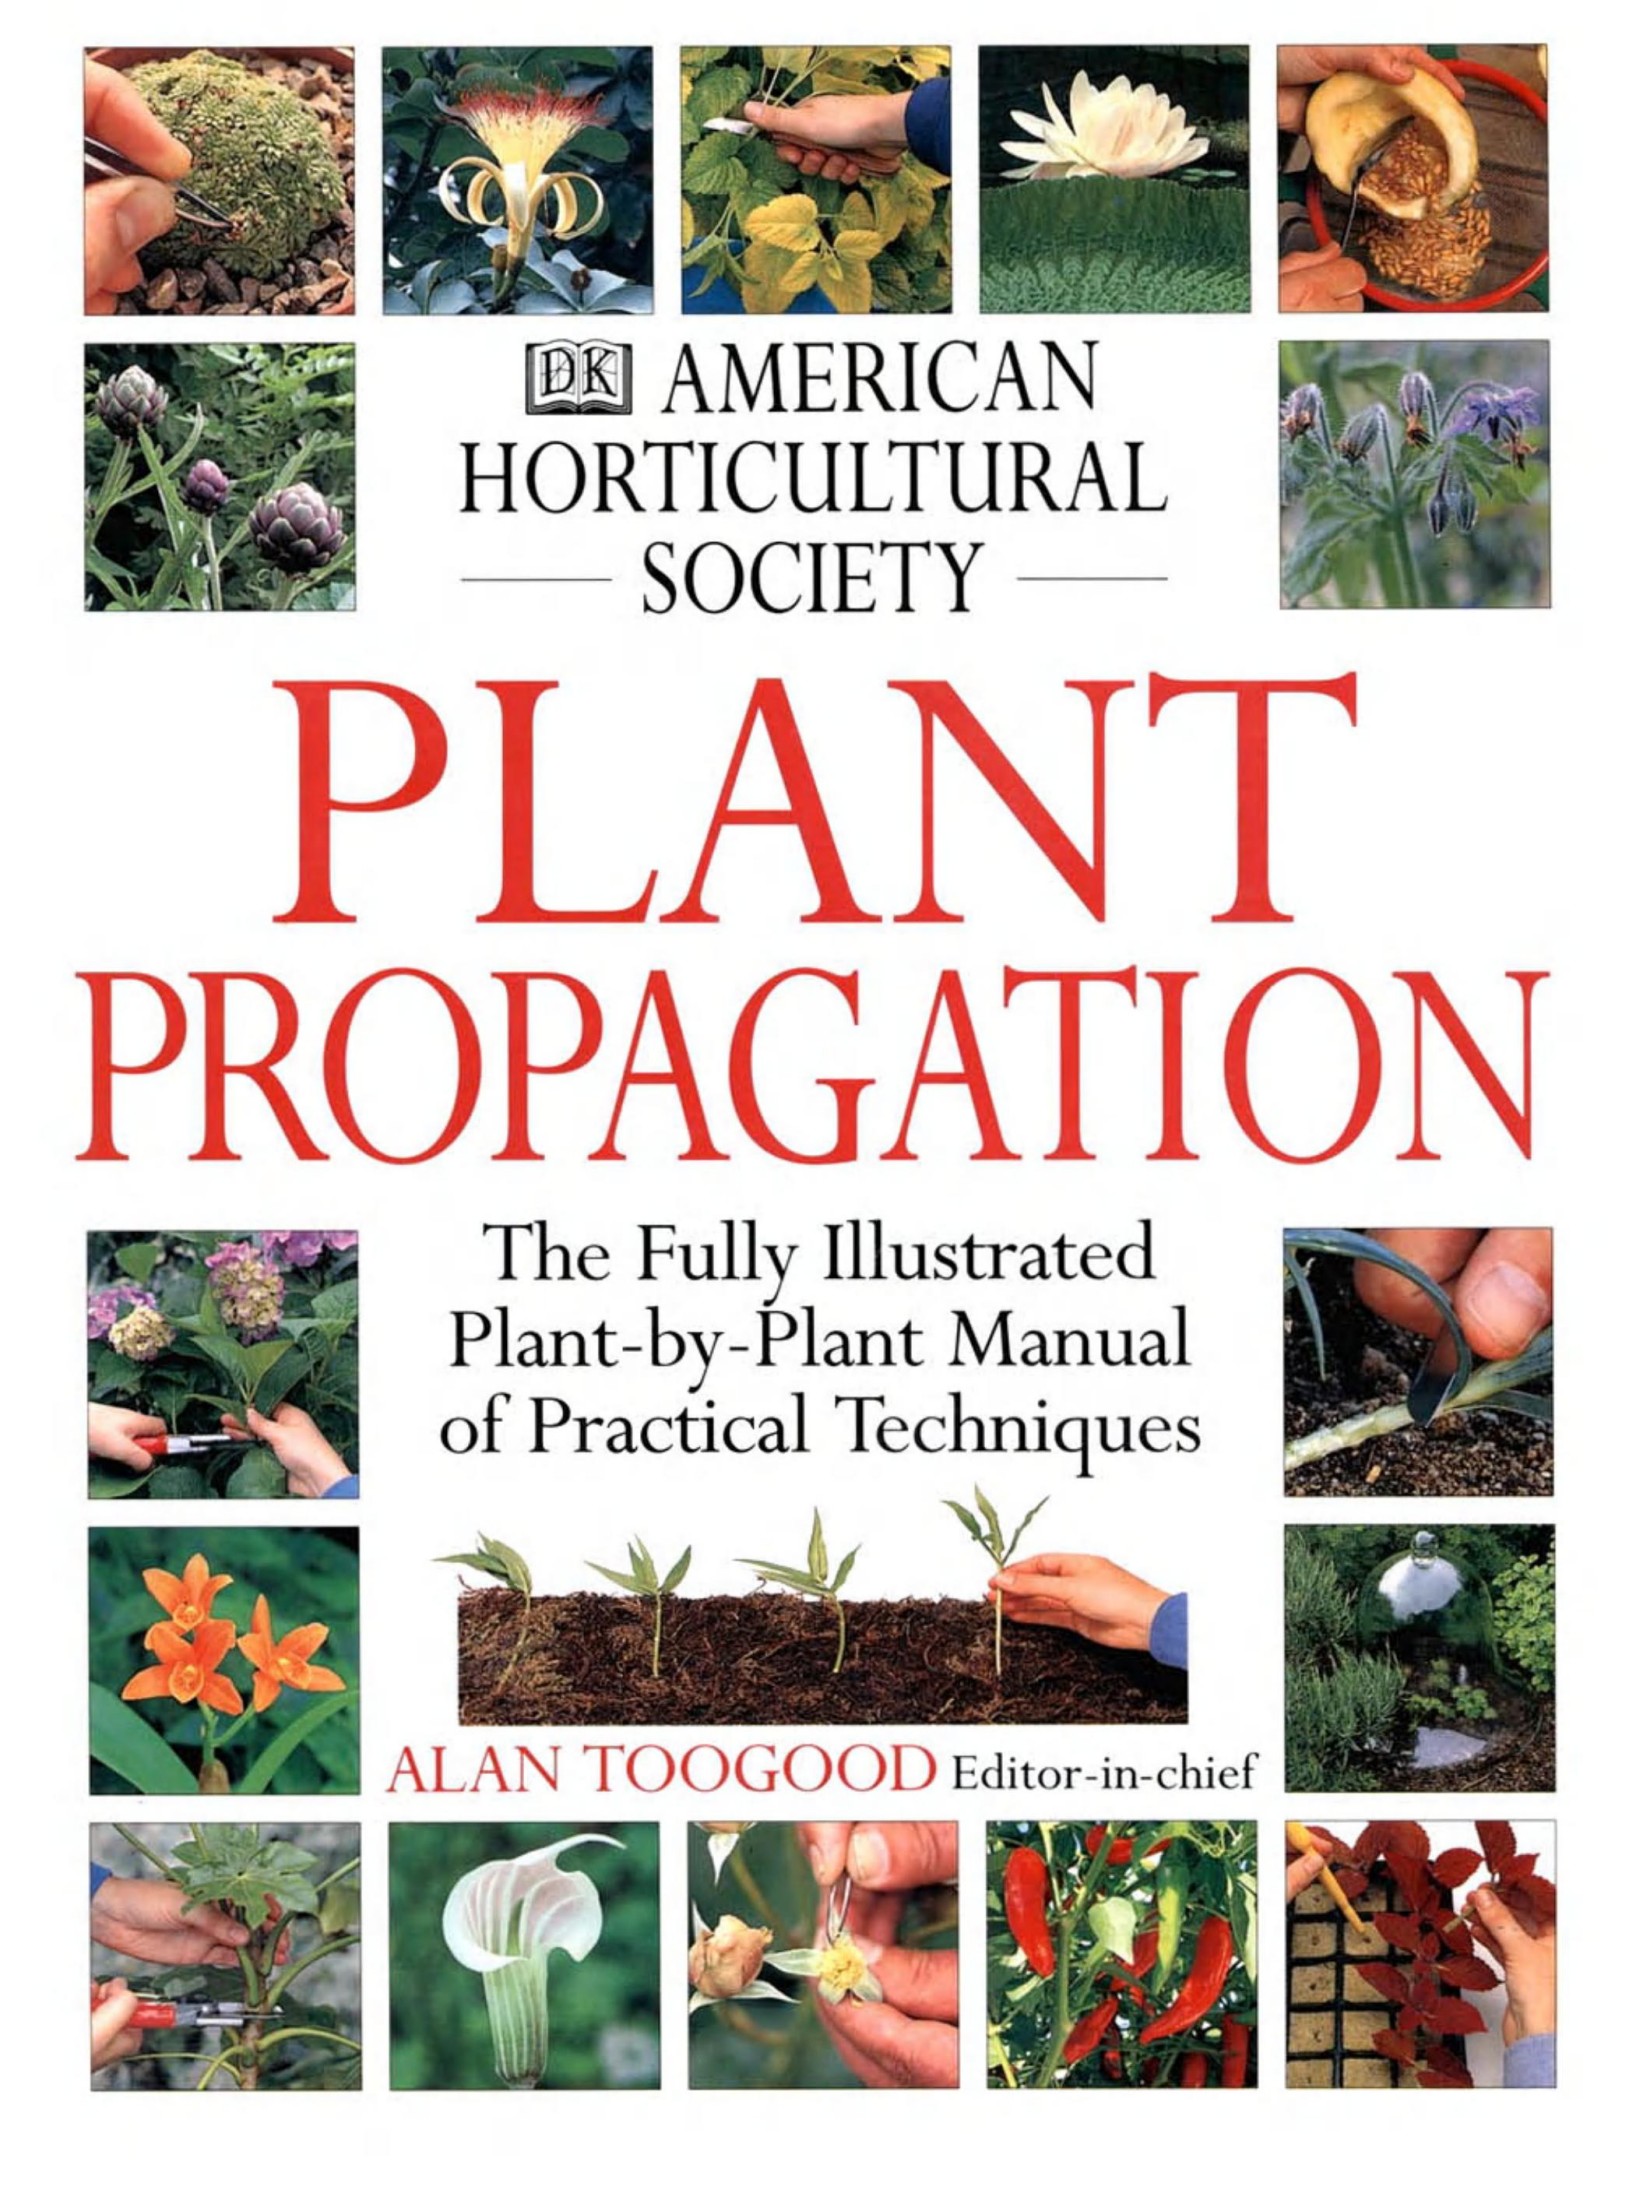 The American Horticultural Society Plant Propagation 2015